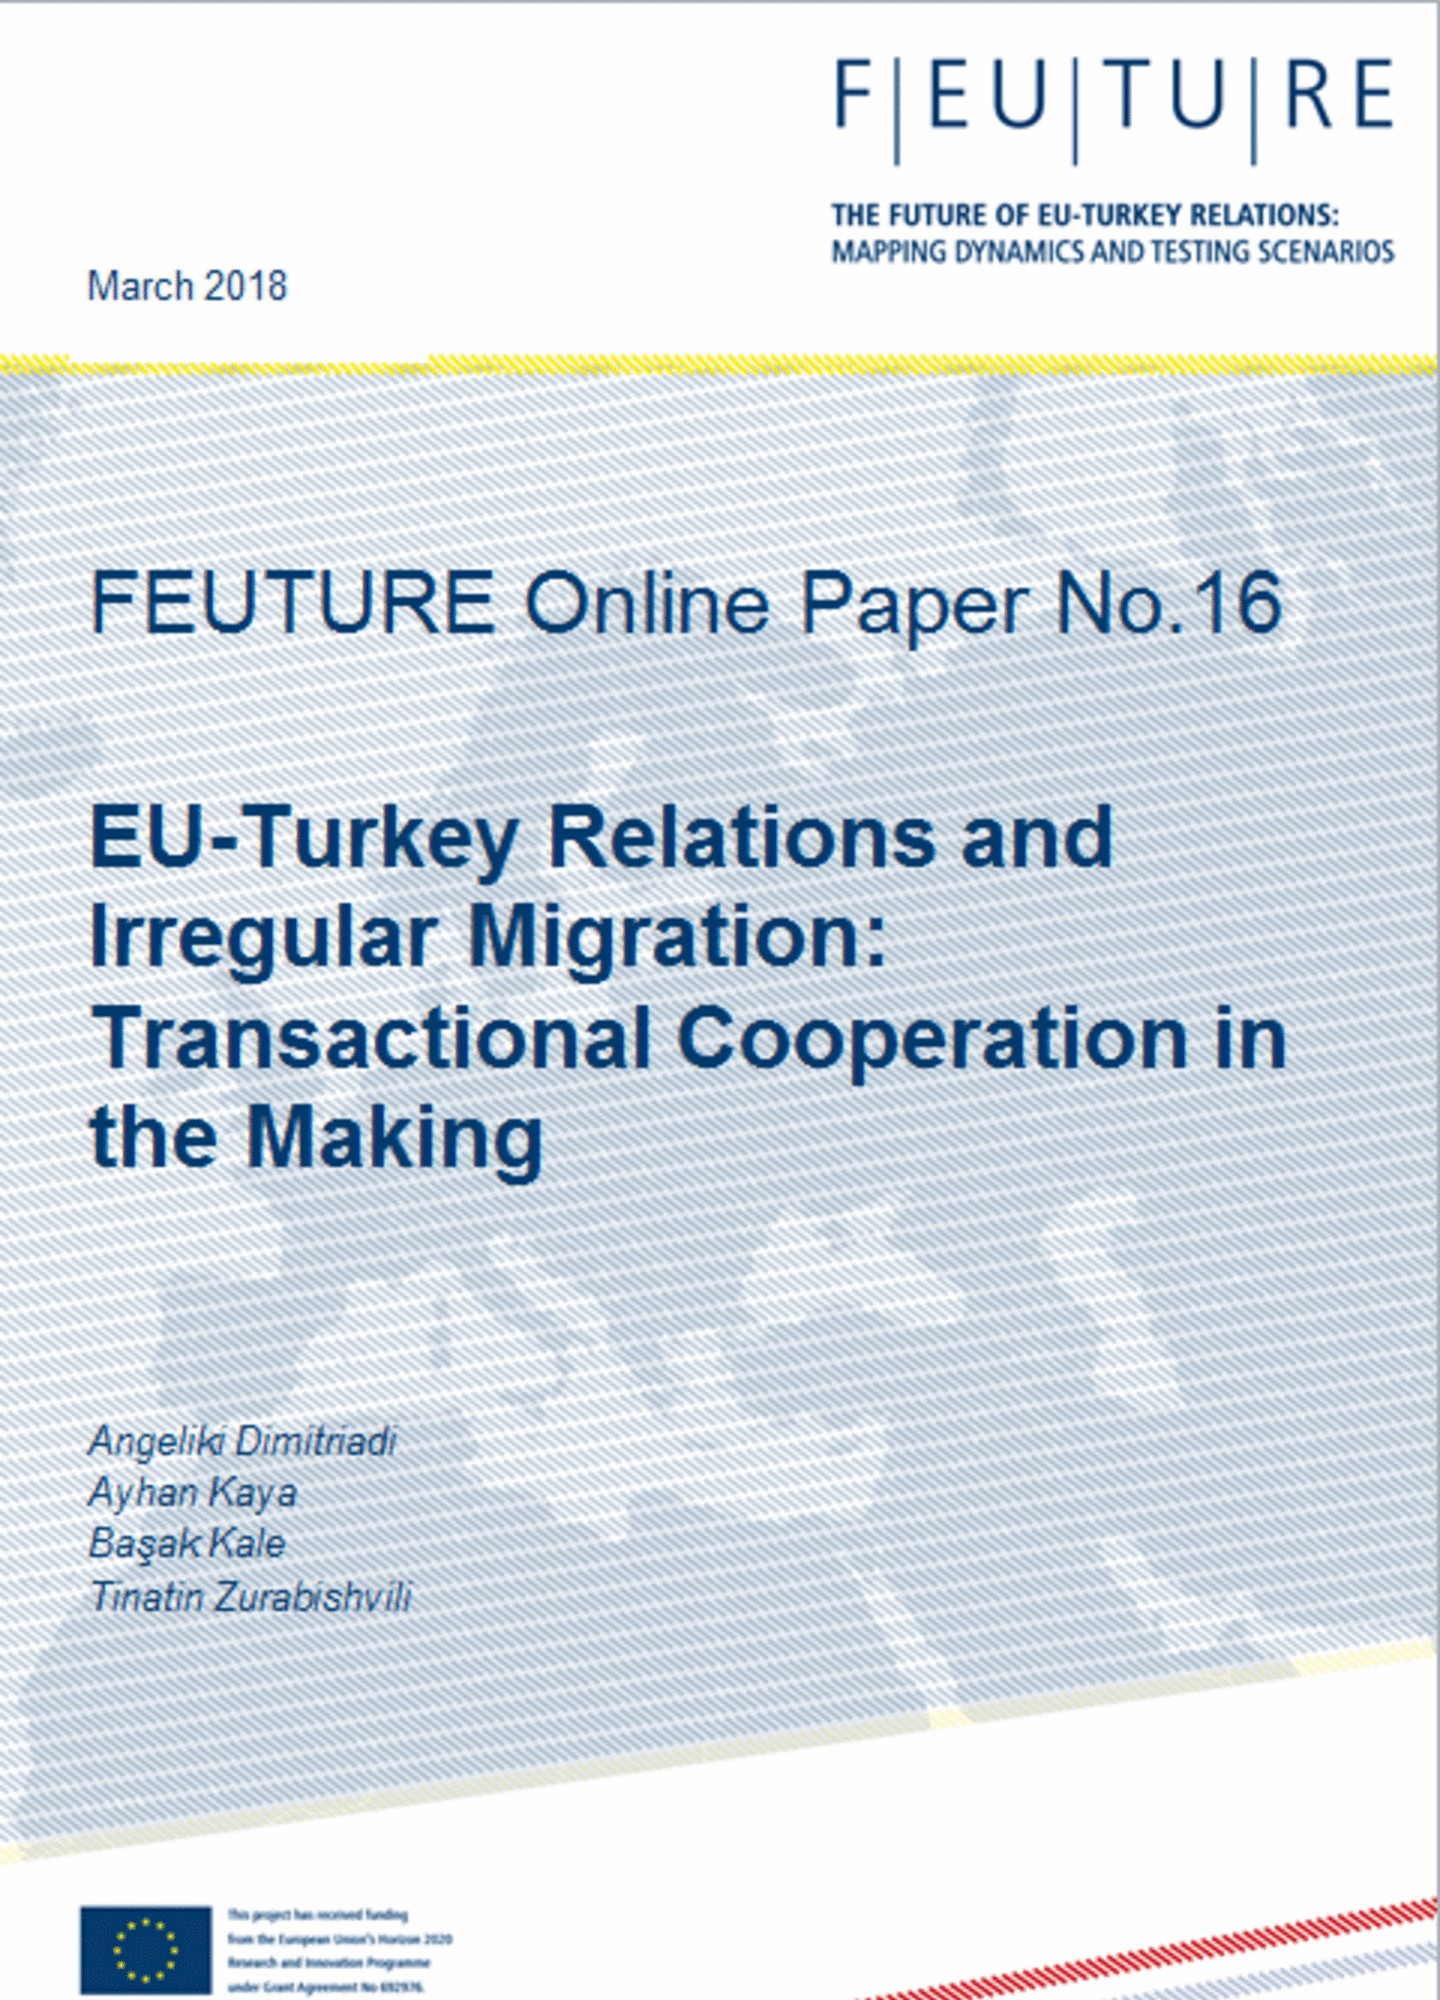 EU-Turkey Relations and Irregular Migration: Transactional Cooperation in the Making